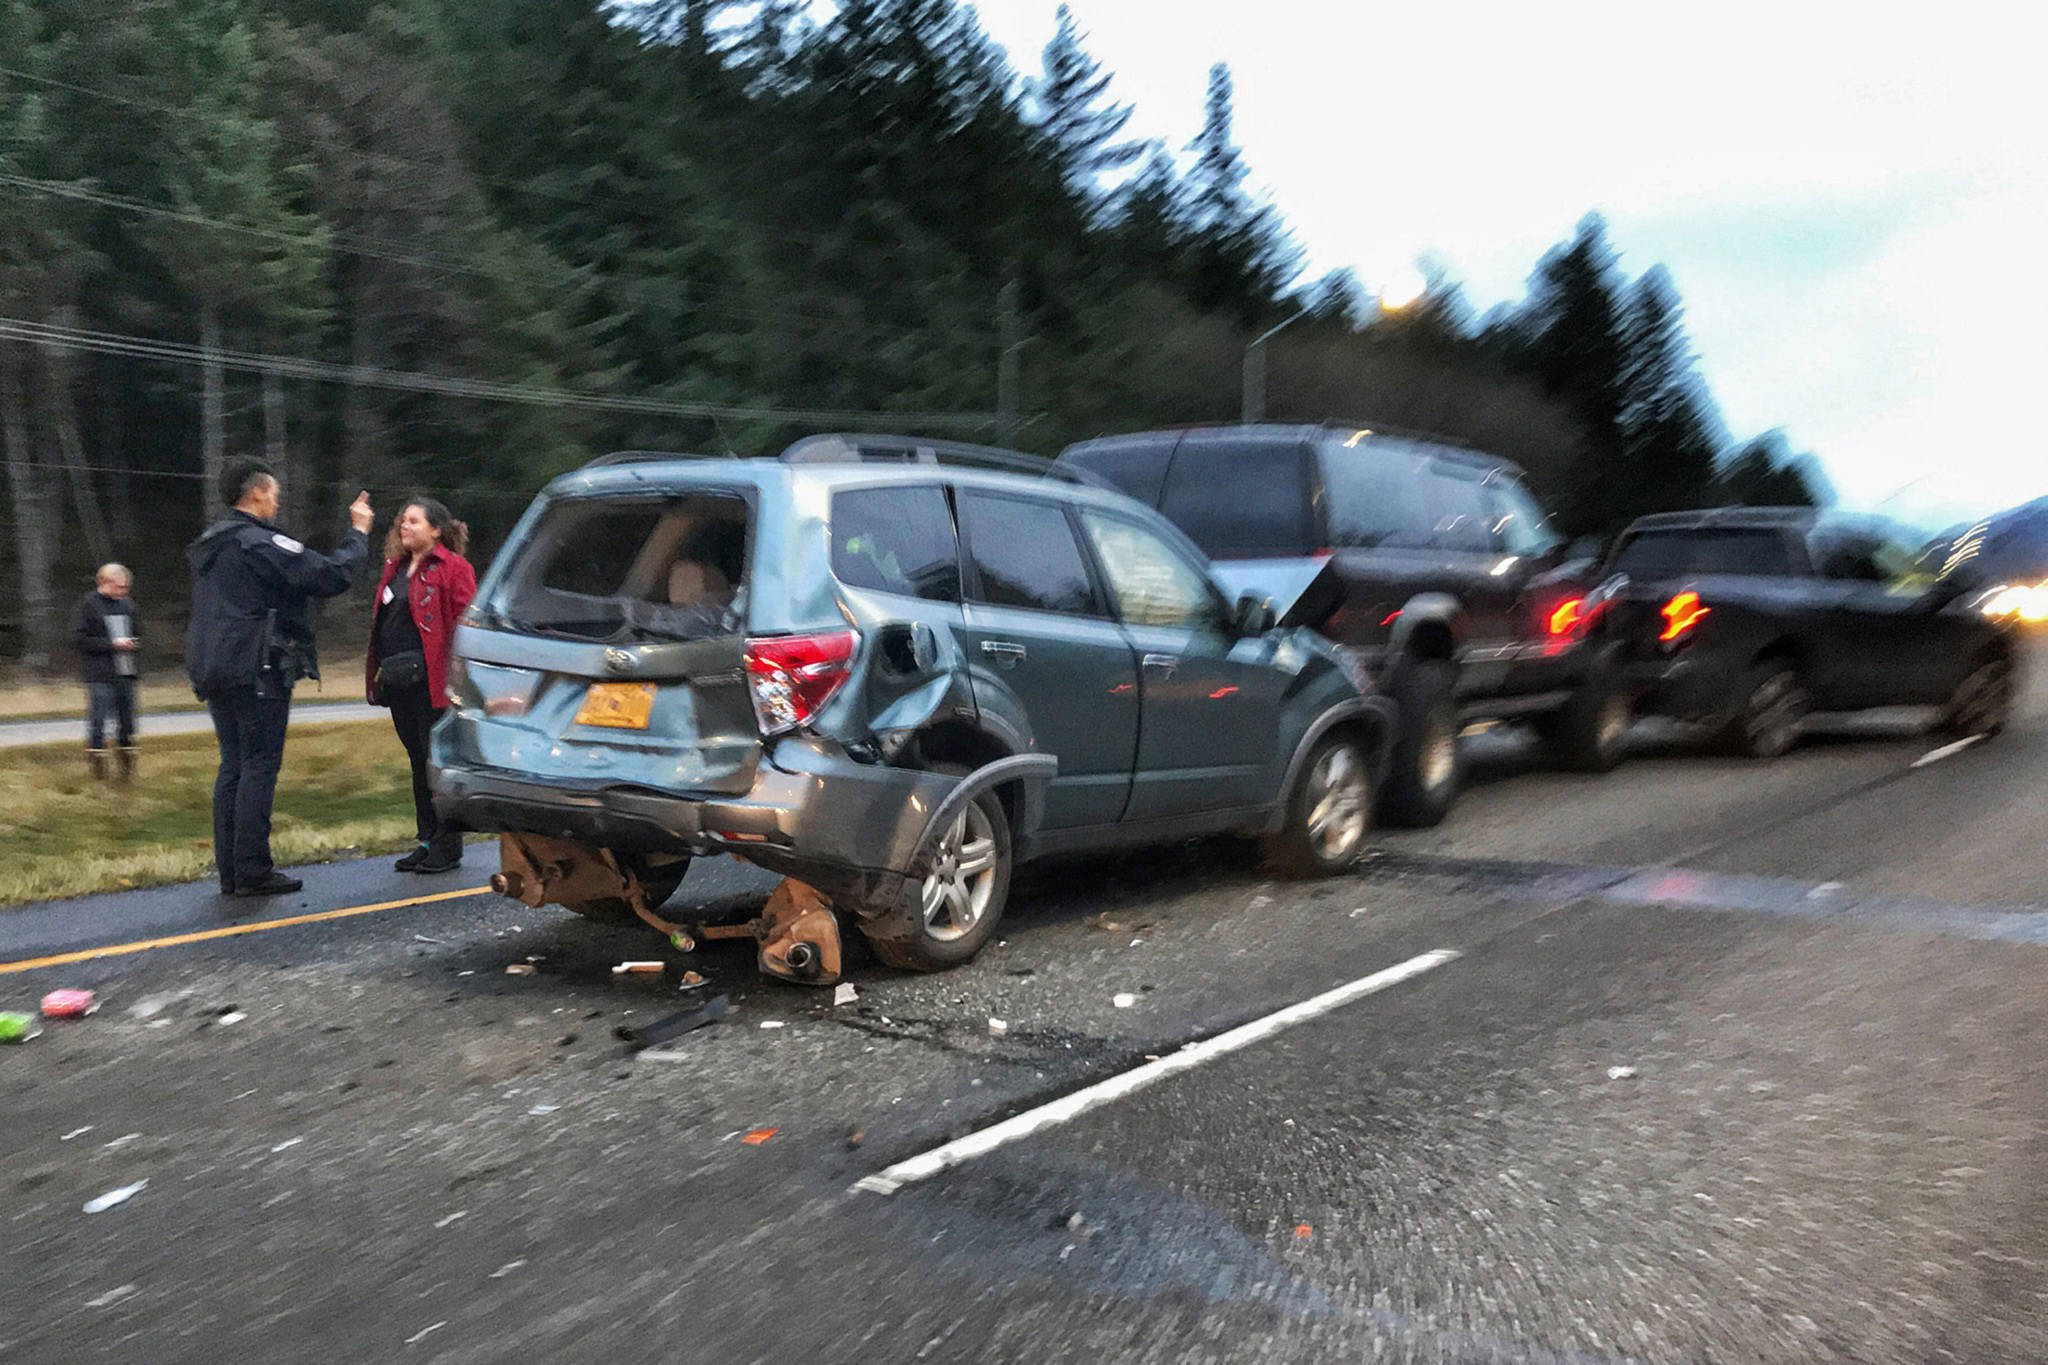 Juneau Police Department Officer C.J. Warnaca administers a field sobriety test after a four-car crash on Egan Drive on Wednesday, Oct. 24, 2018. Nobody was harmed, authorities said on scene. (Michael Penn | Juneau Empire)